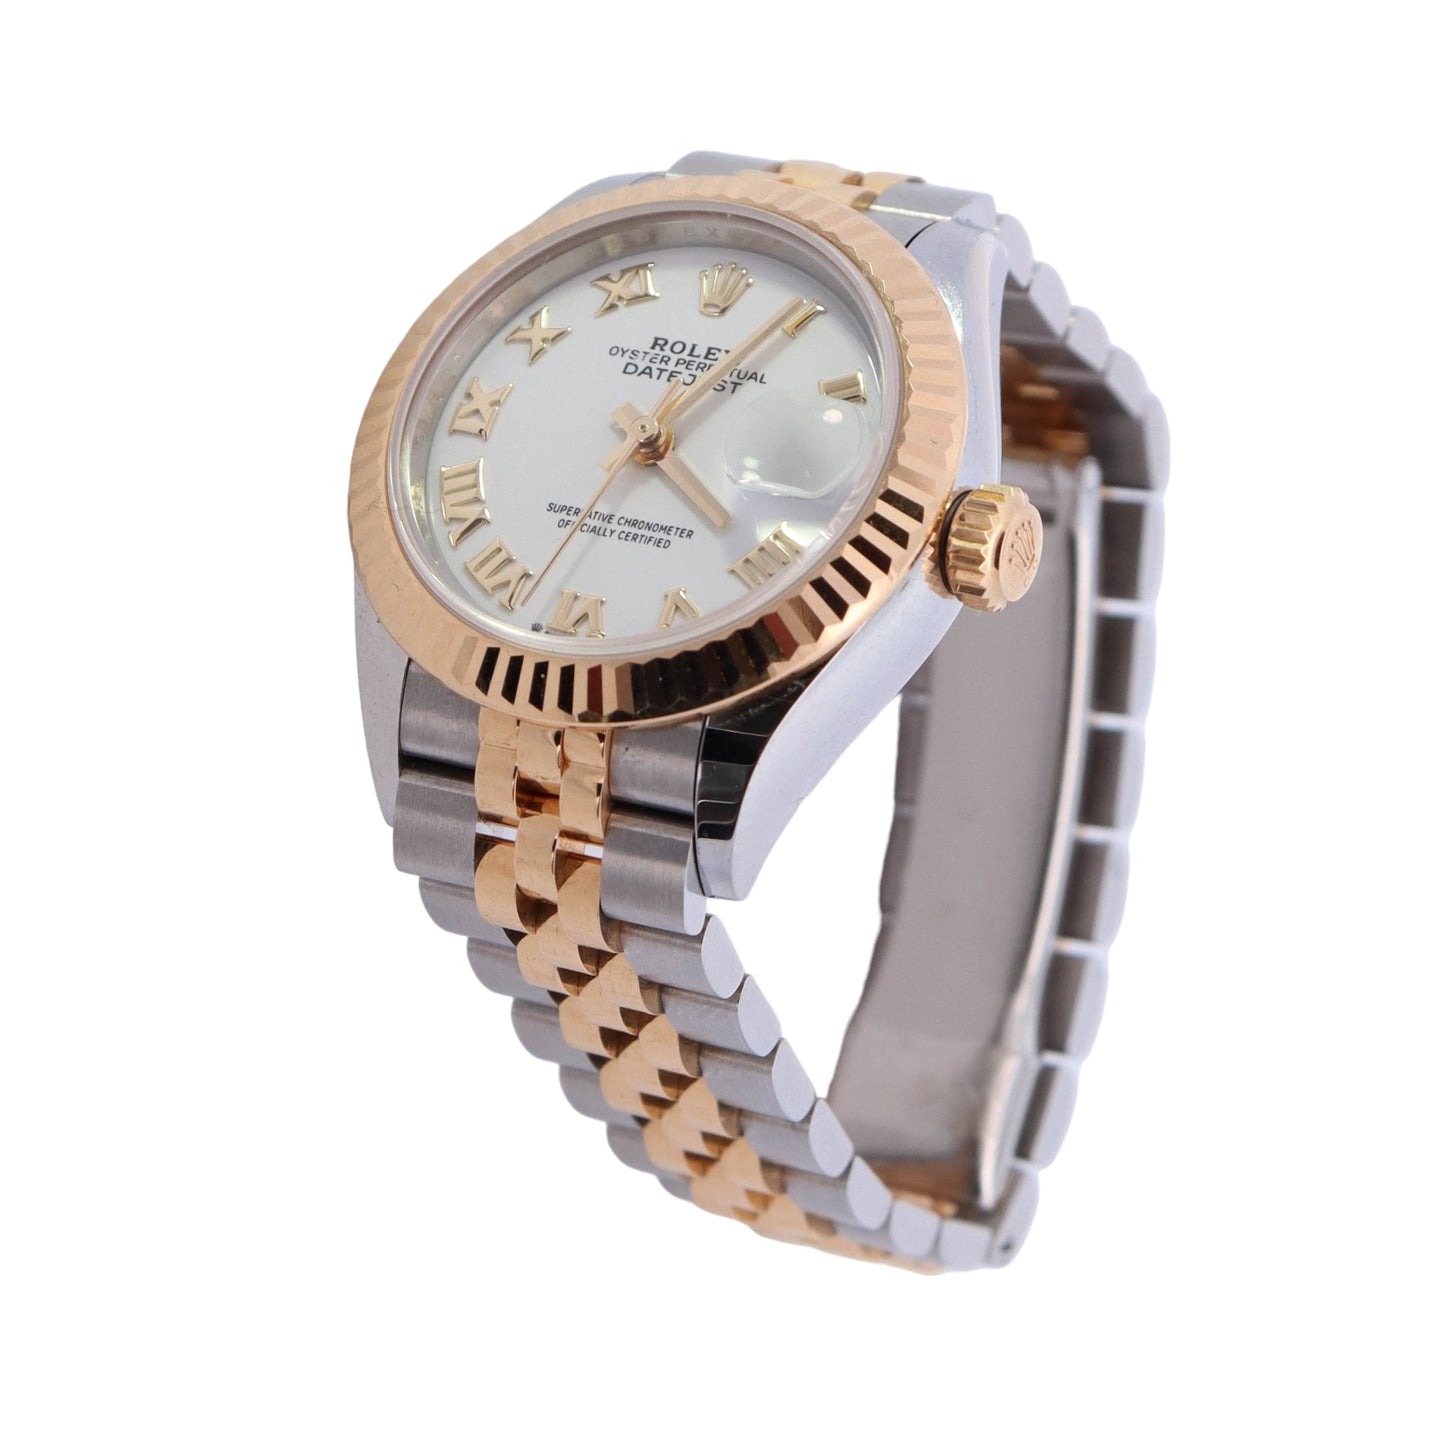 Rolex Datejust Two Tone Stainless Steel & Yellow Gold 28mm White Roman Dial Watch Reference #: 279173 - Happy Jewelers Fine Jewelry Lifetime Warranty